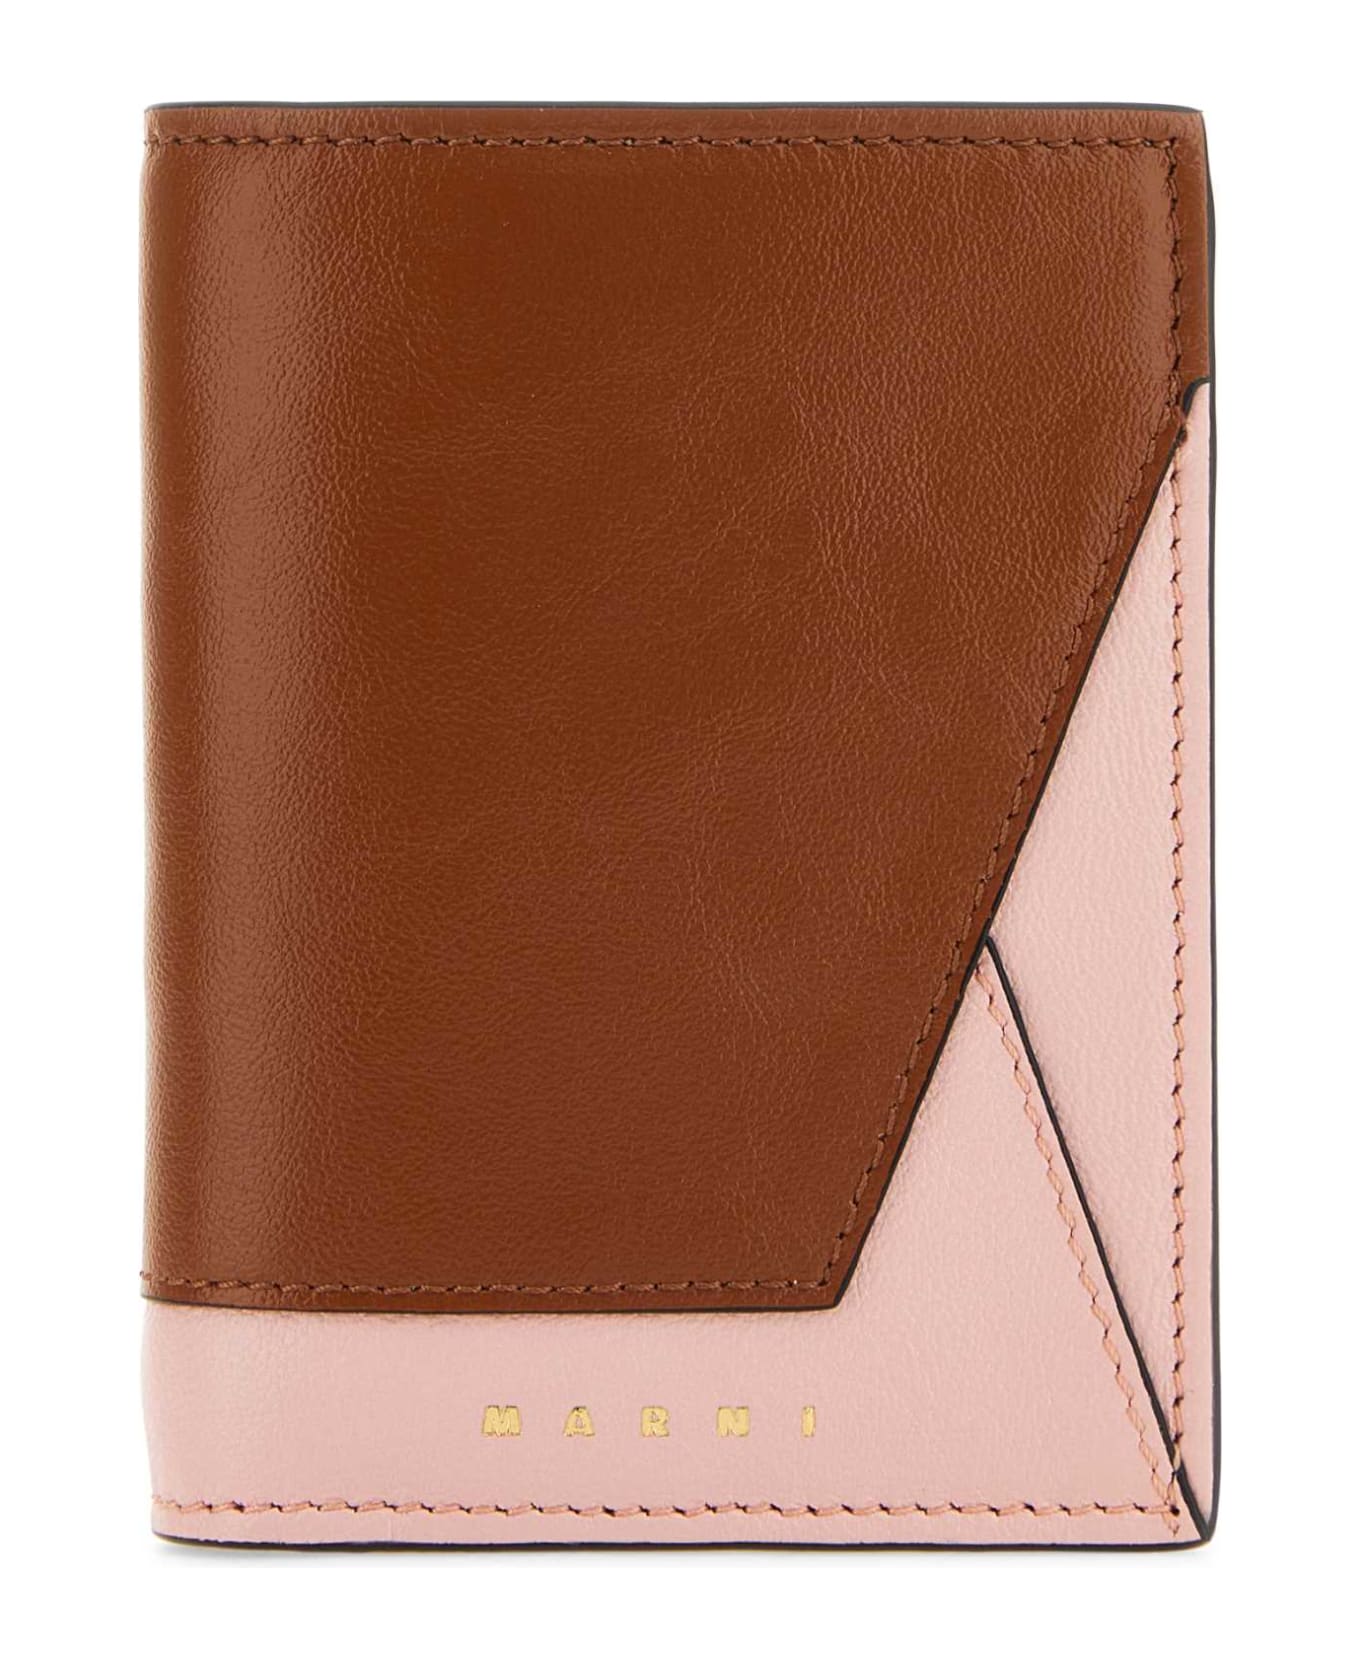 Marni Two-tone Leather Wallet - ZO670